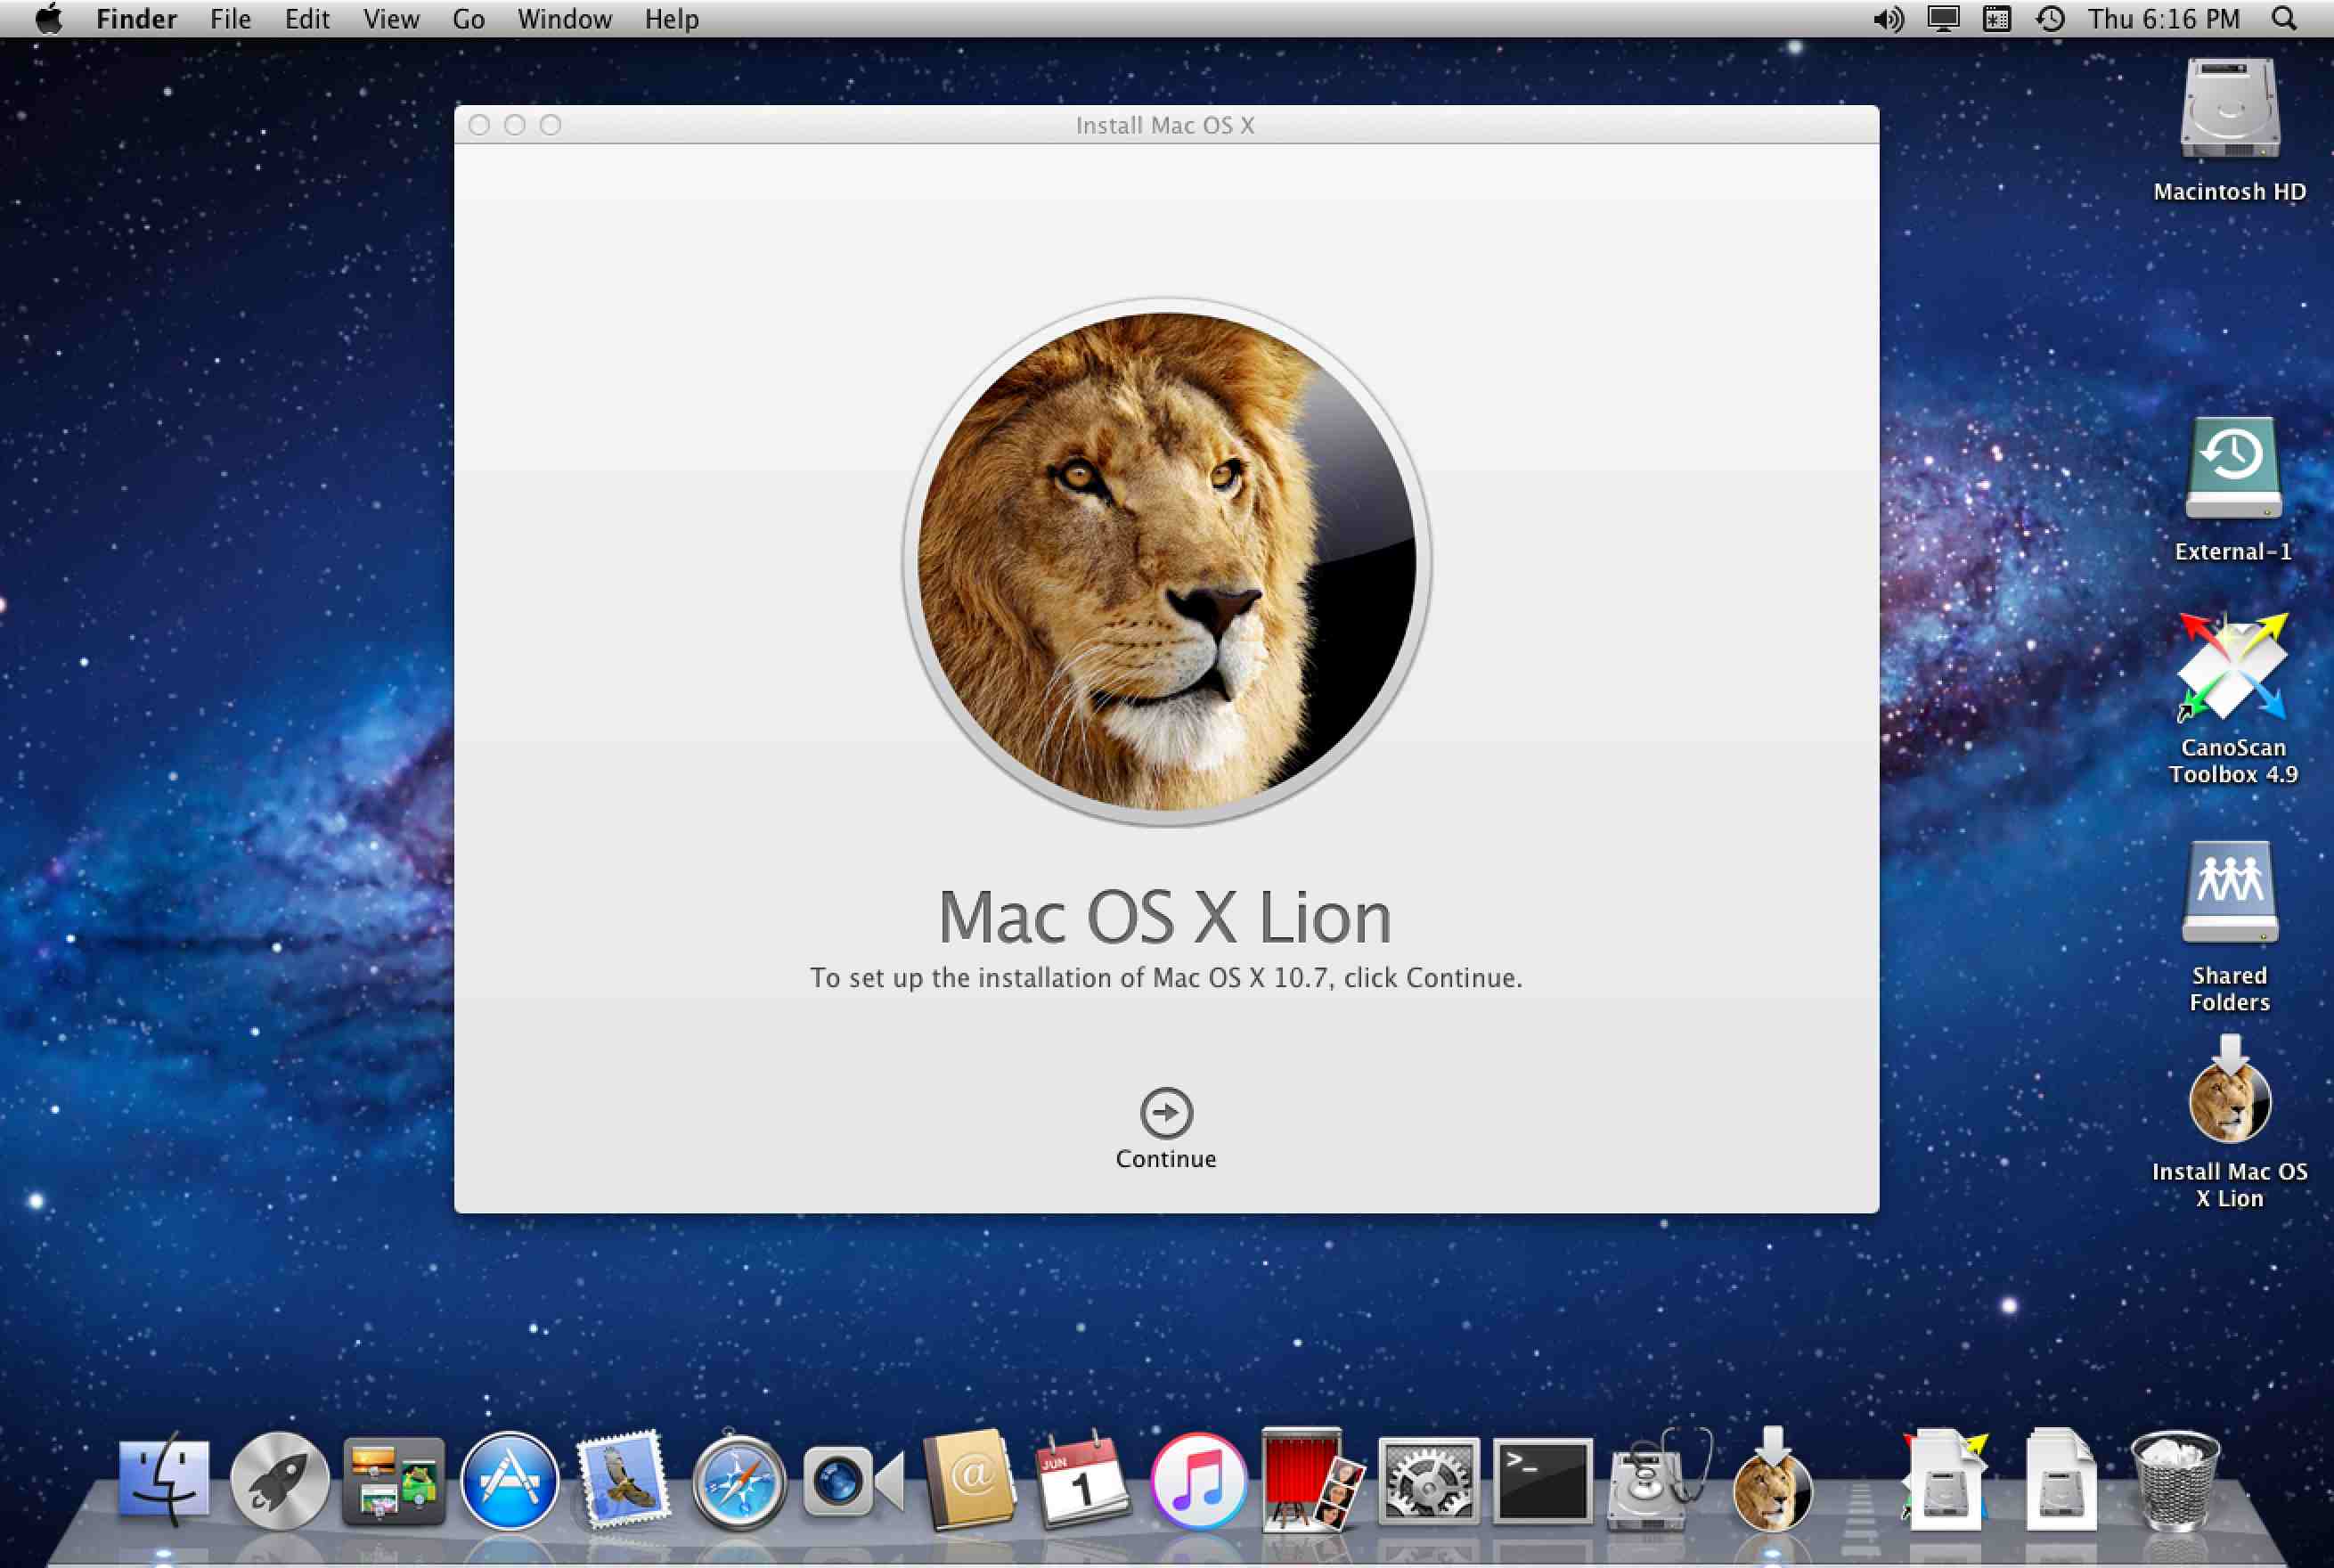 free os x lion 10.7.0 download for bootable usb